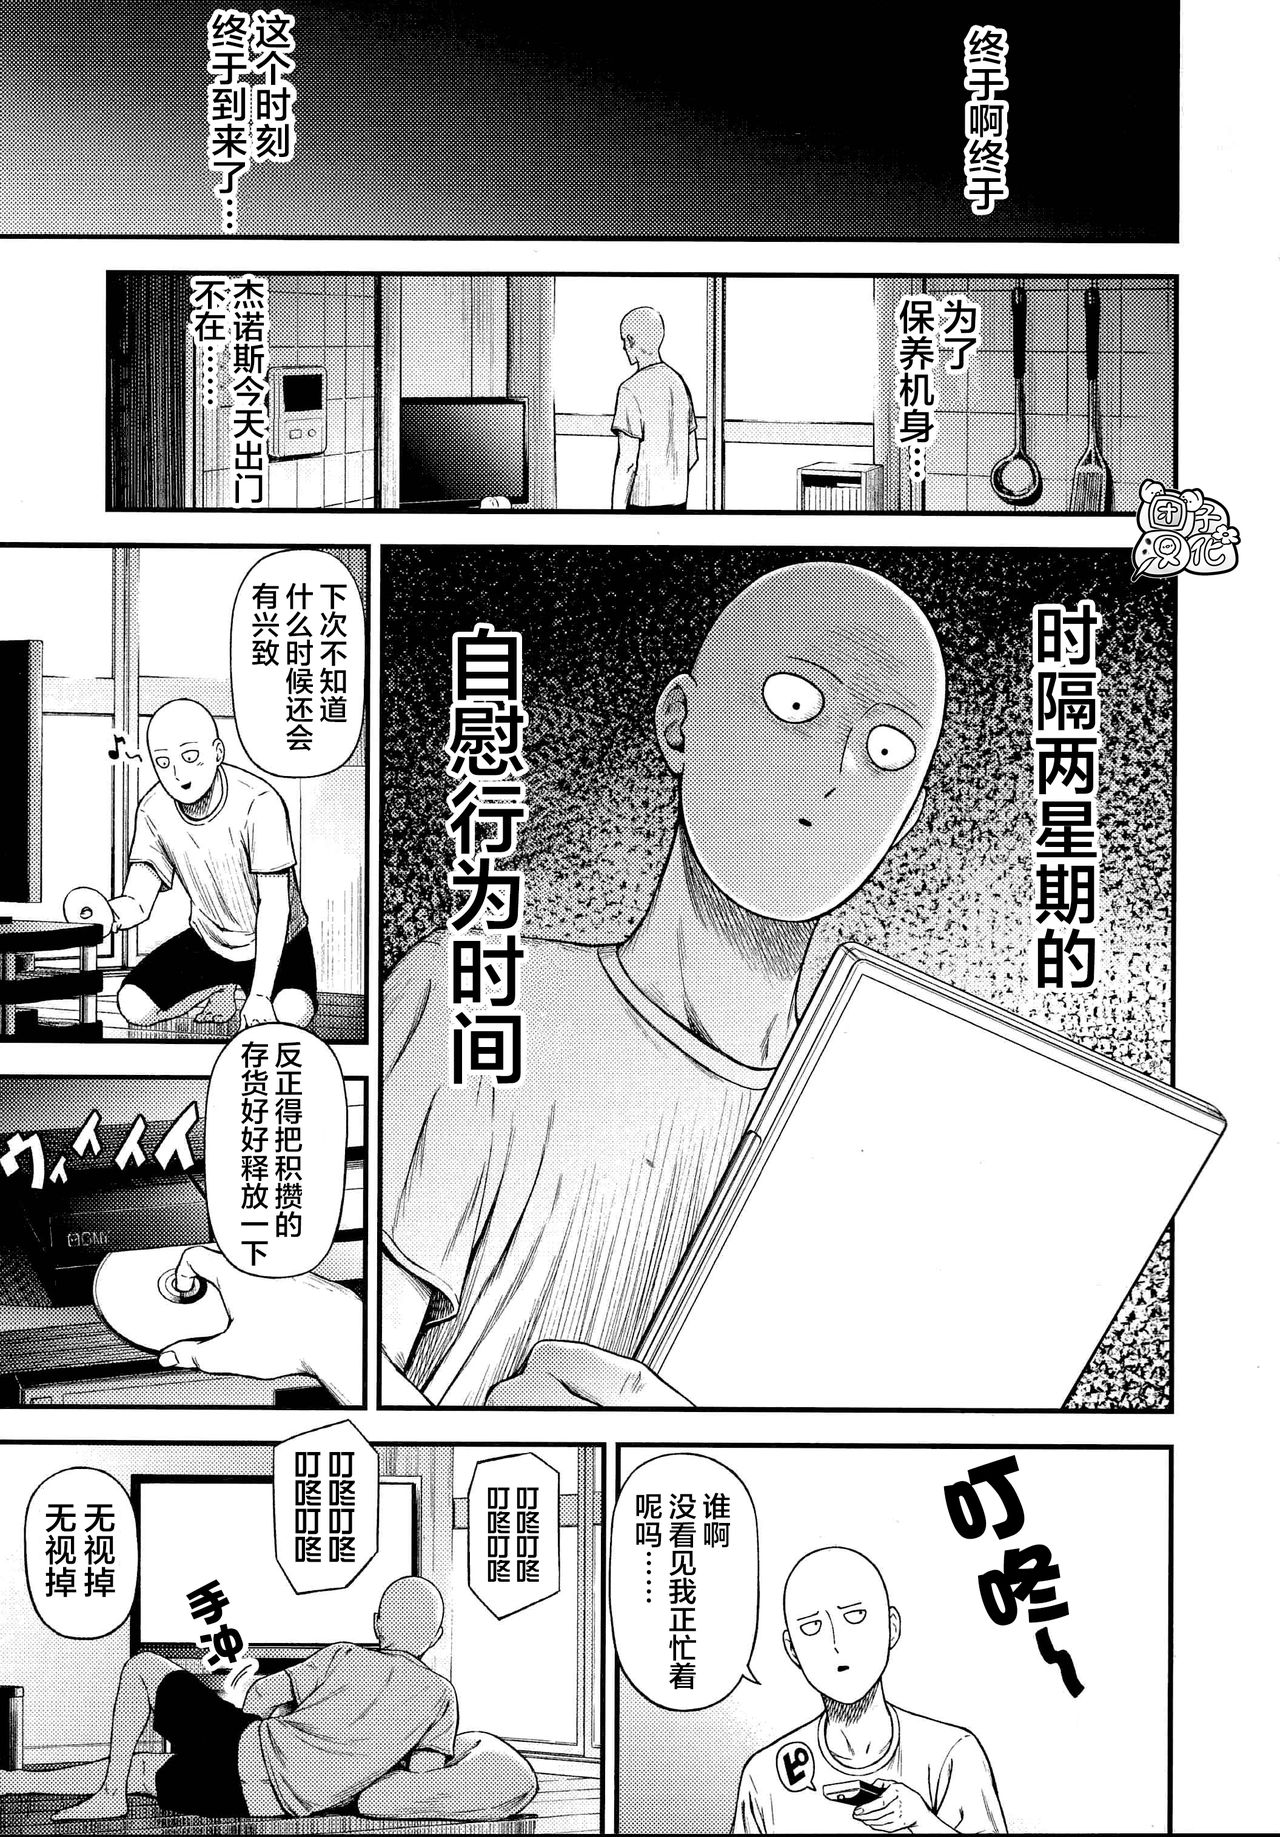 [Kiyosumi Hurricane (Kiyosumi Hurricane)] ONE-HURRICANE (One Punch Man) page 2 full